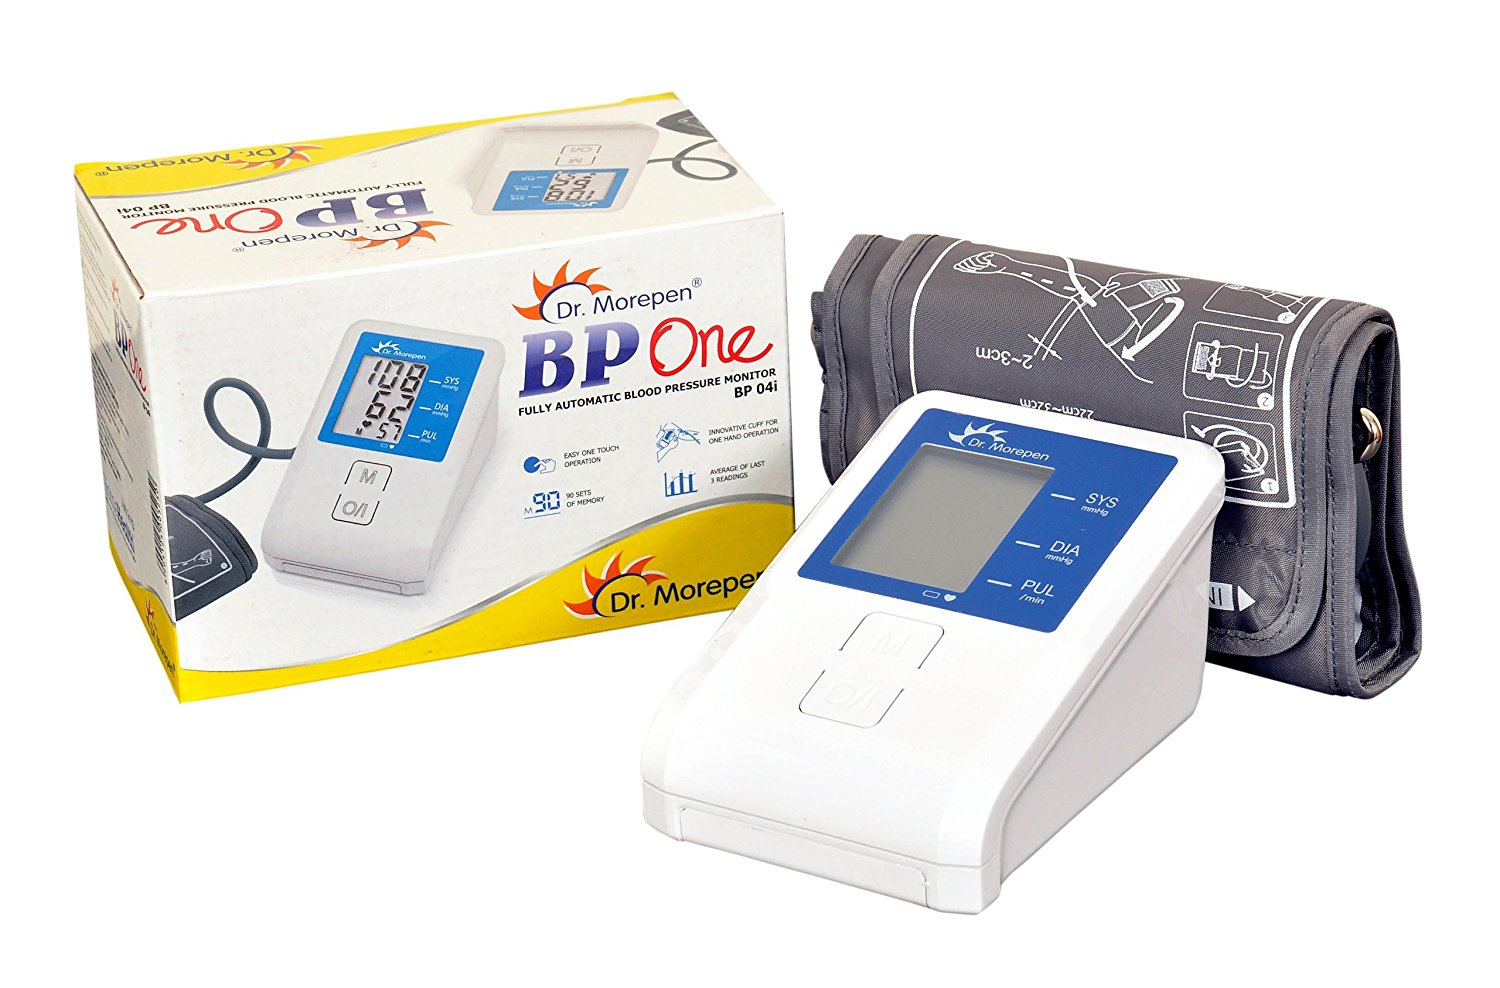 Dr-Morepen-BPOne-Fully-Automatic-BP-Monitor-BP-04i